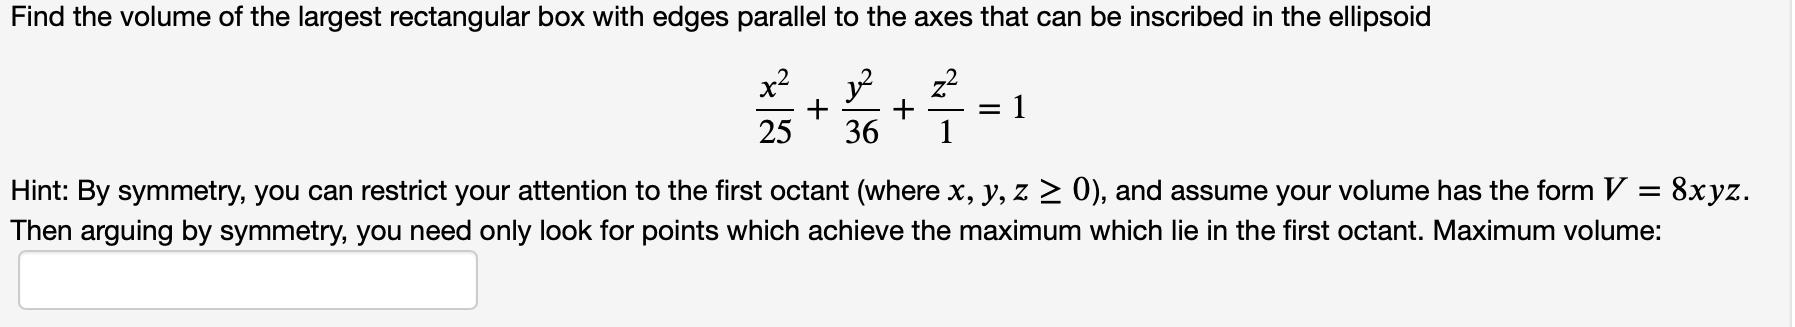 Find the volume of the largest rectangular box with edges parallel to the axes that can be inscribed in the